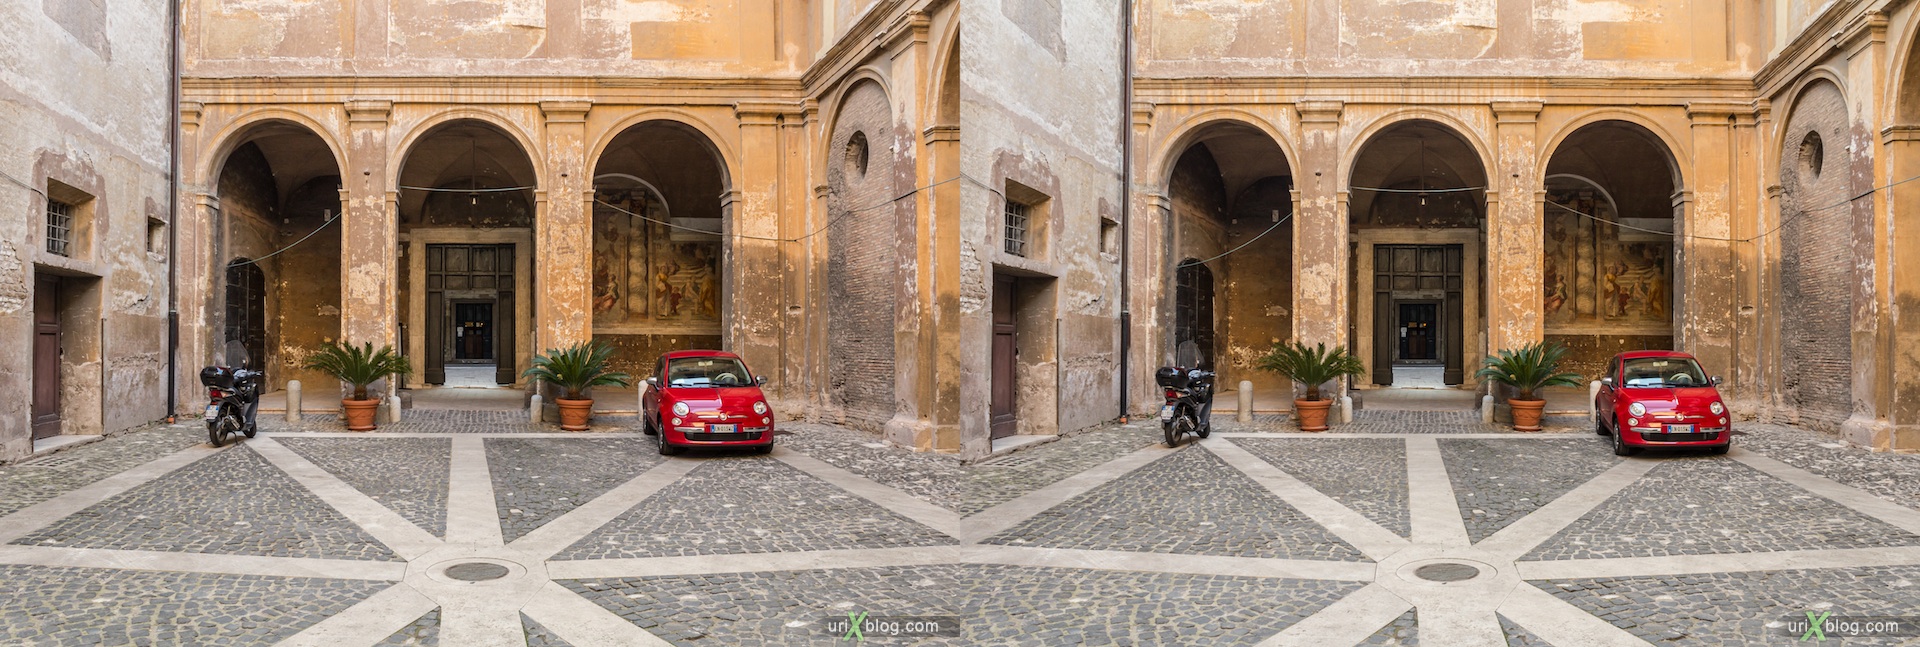 2012, Santi Quattro Coronati Church, Rome, Italy, cathedral, monastery, Christianity, Catholicism, 3D, stereo pair, cross-eyed, crossview, cross view stereo pair